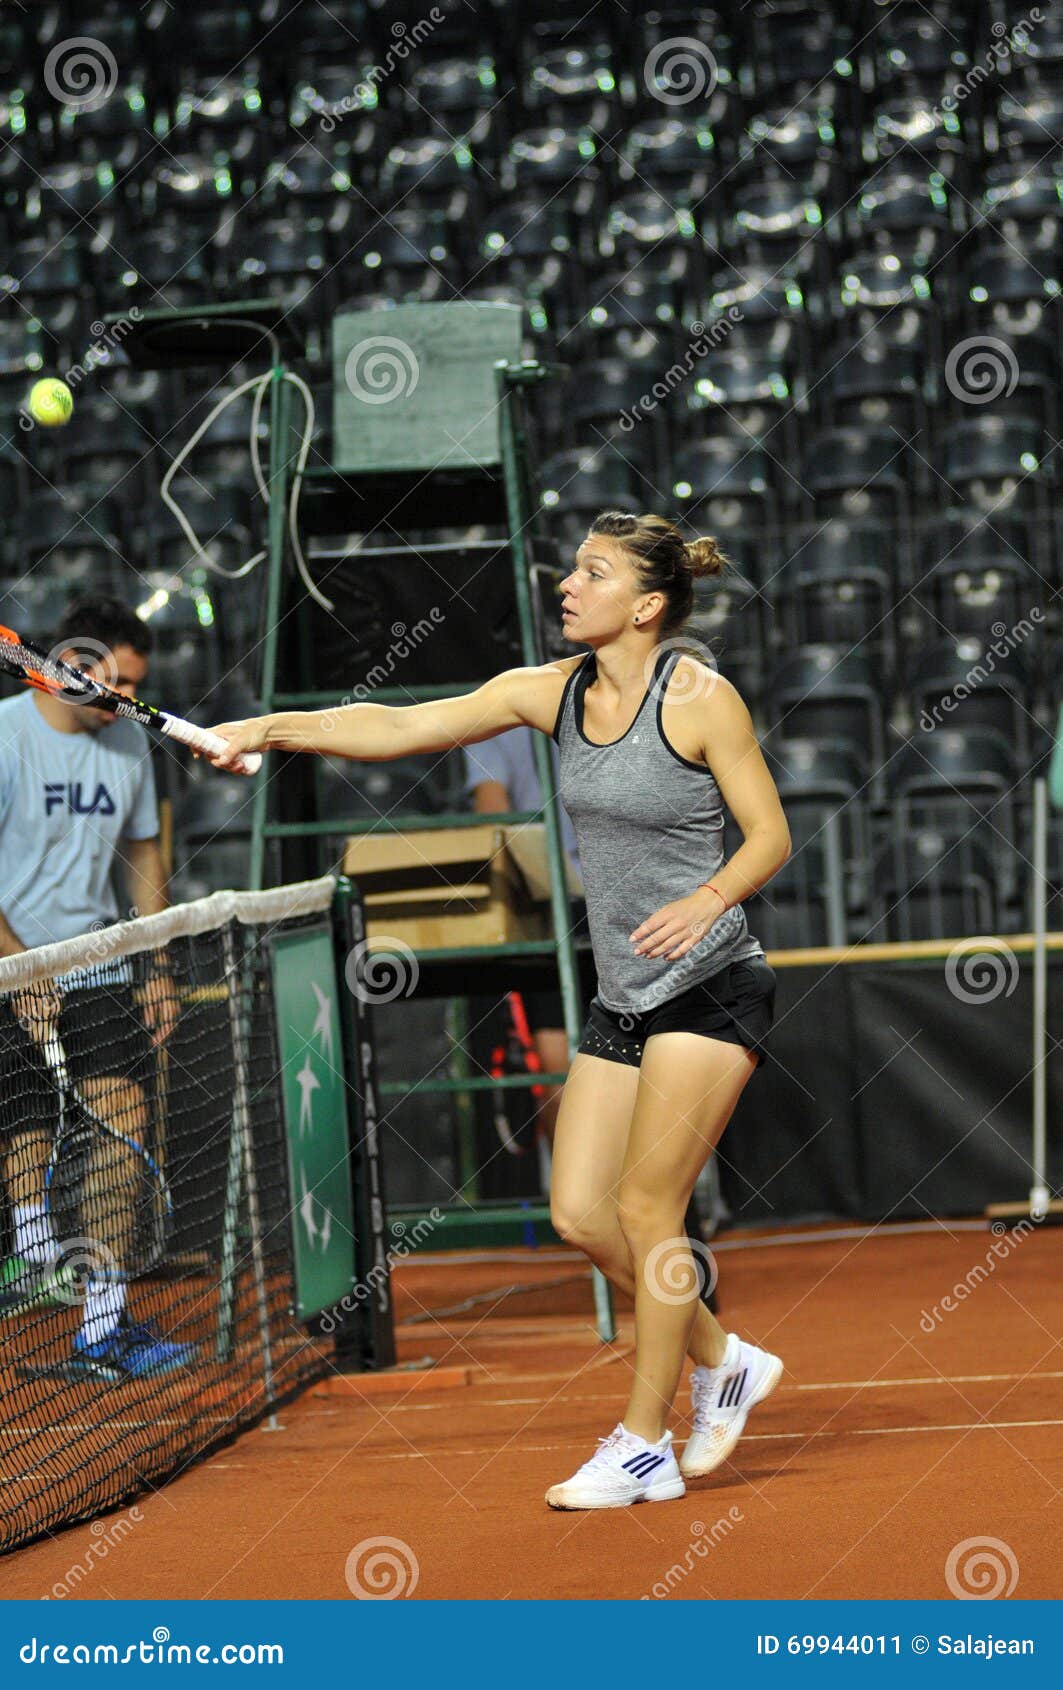 Tennis Player Simona Halep Training Before A Match Editorial Photo Image Of Match Court 69944011